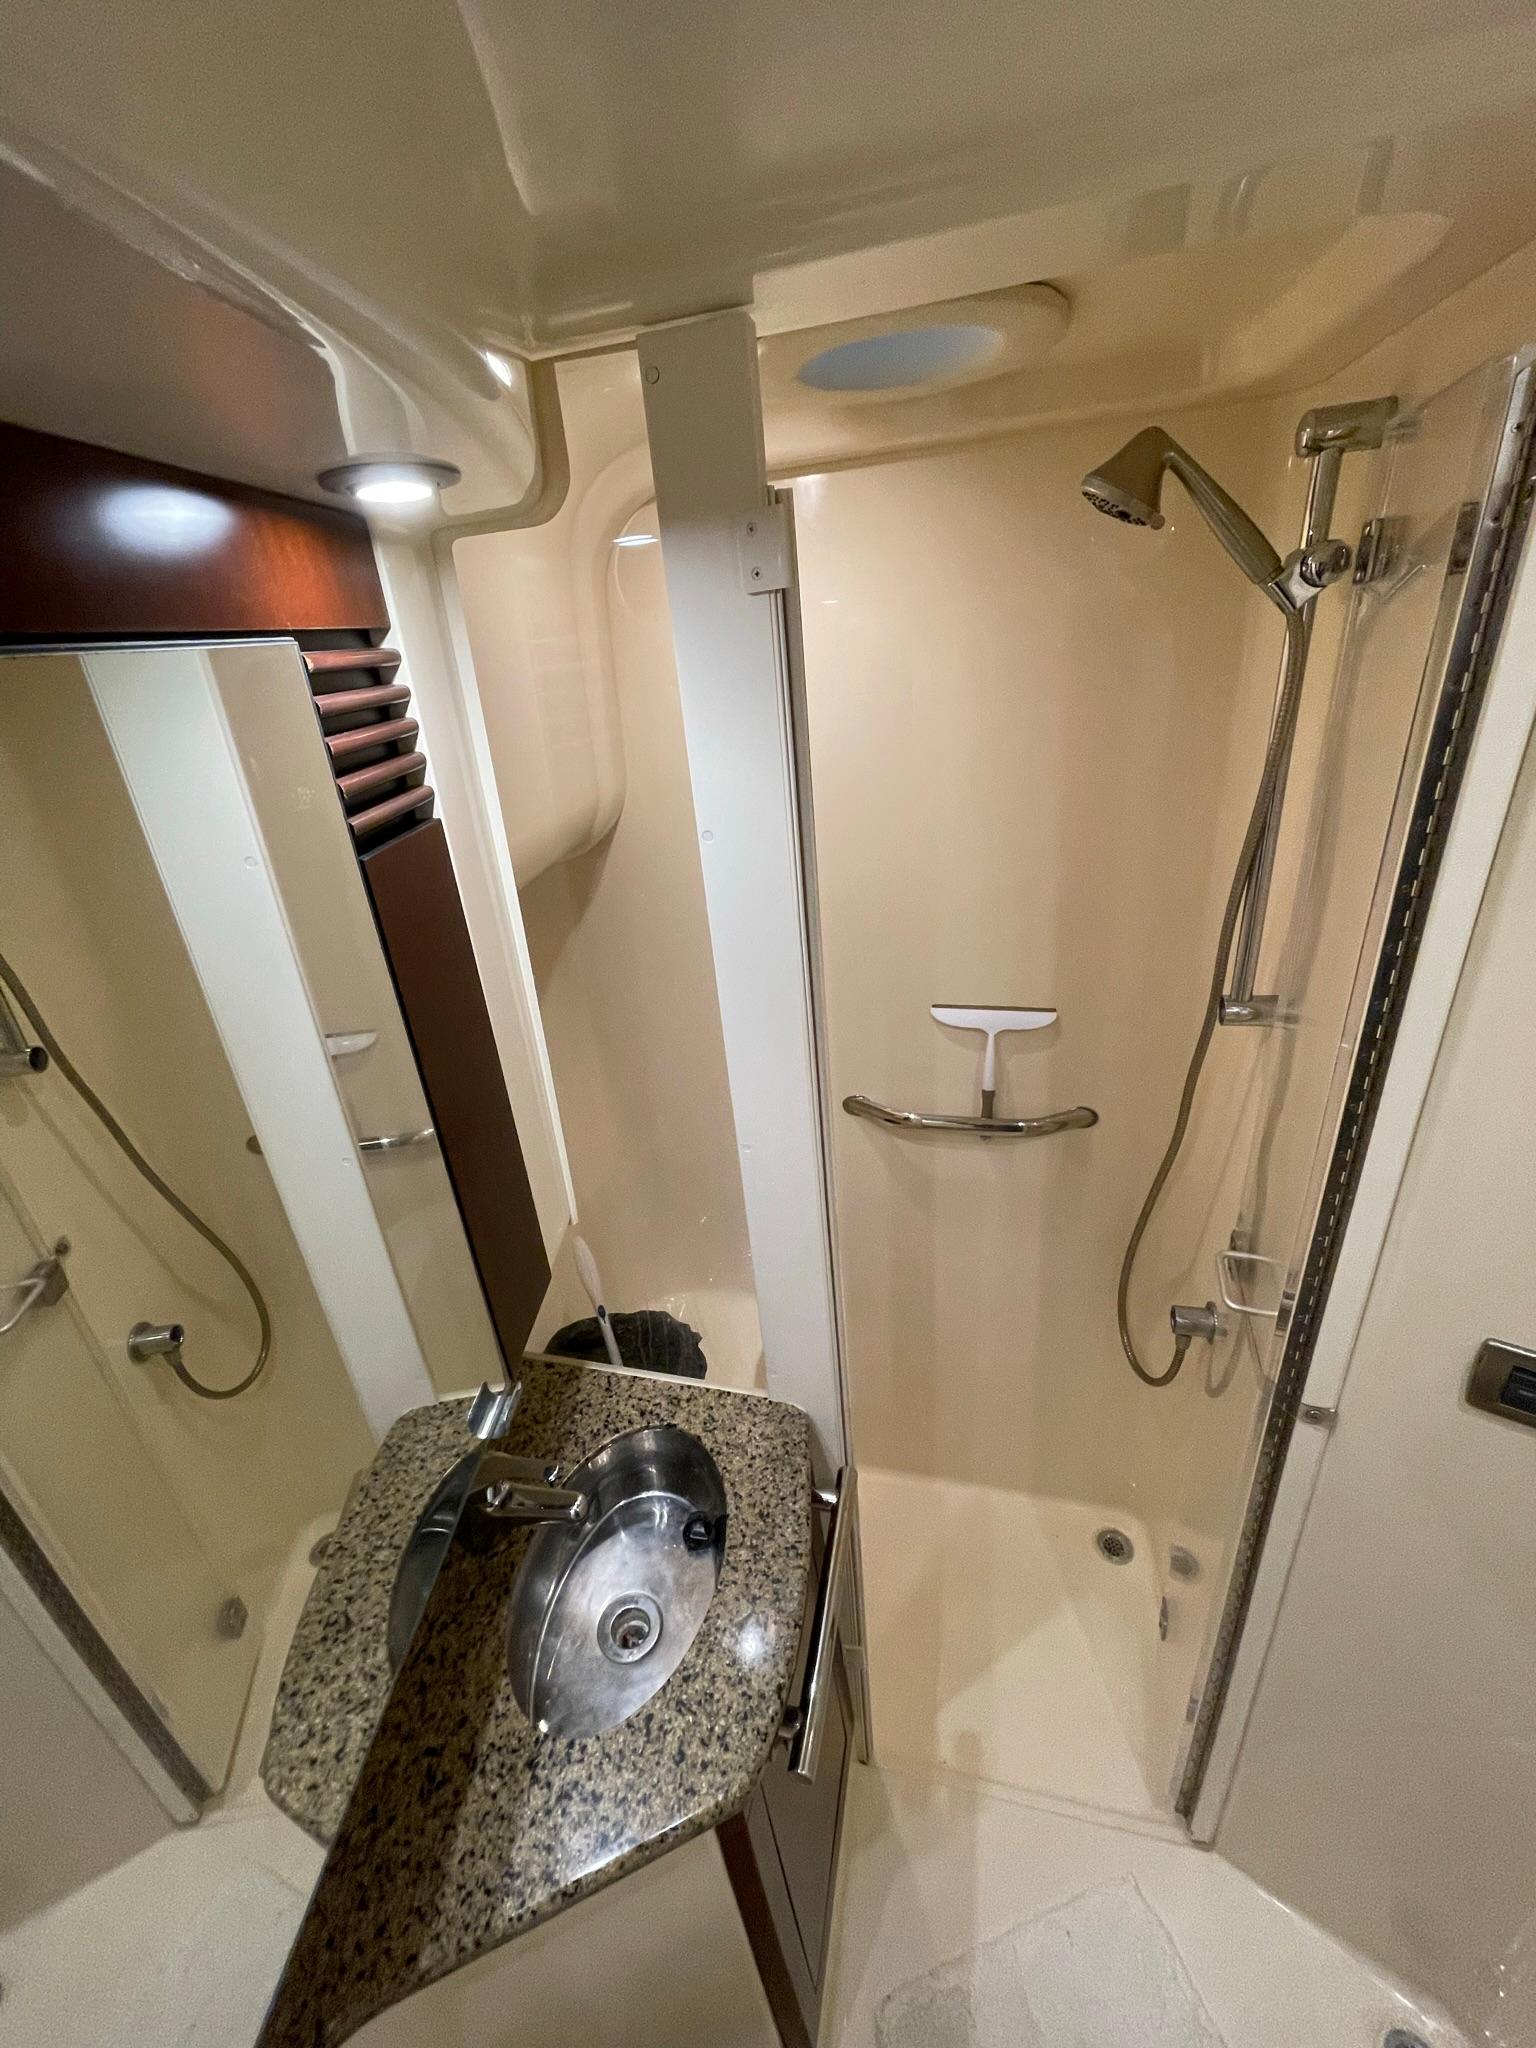 MASTER STATEROOM HEAD WITH SPEARATE STALL SHOWER & HARD DOOR